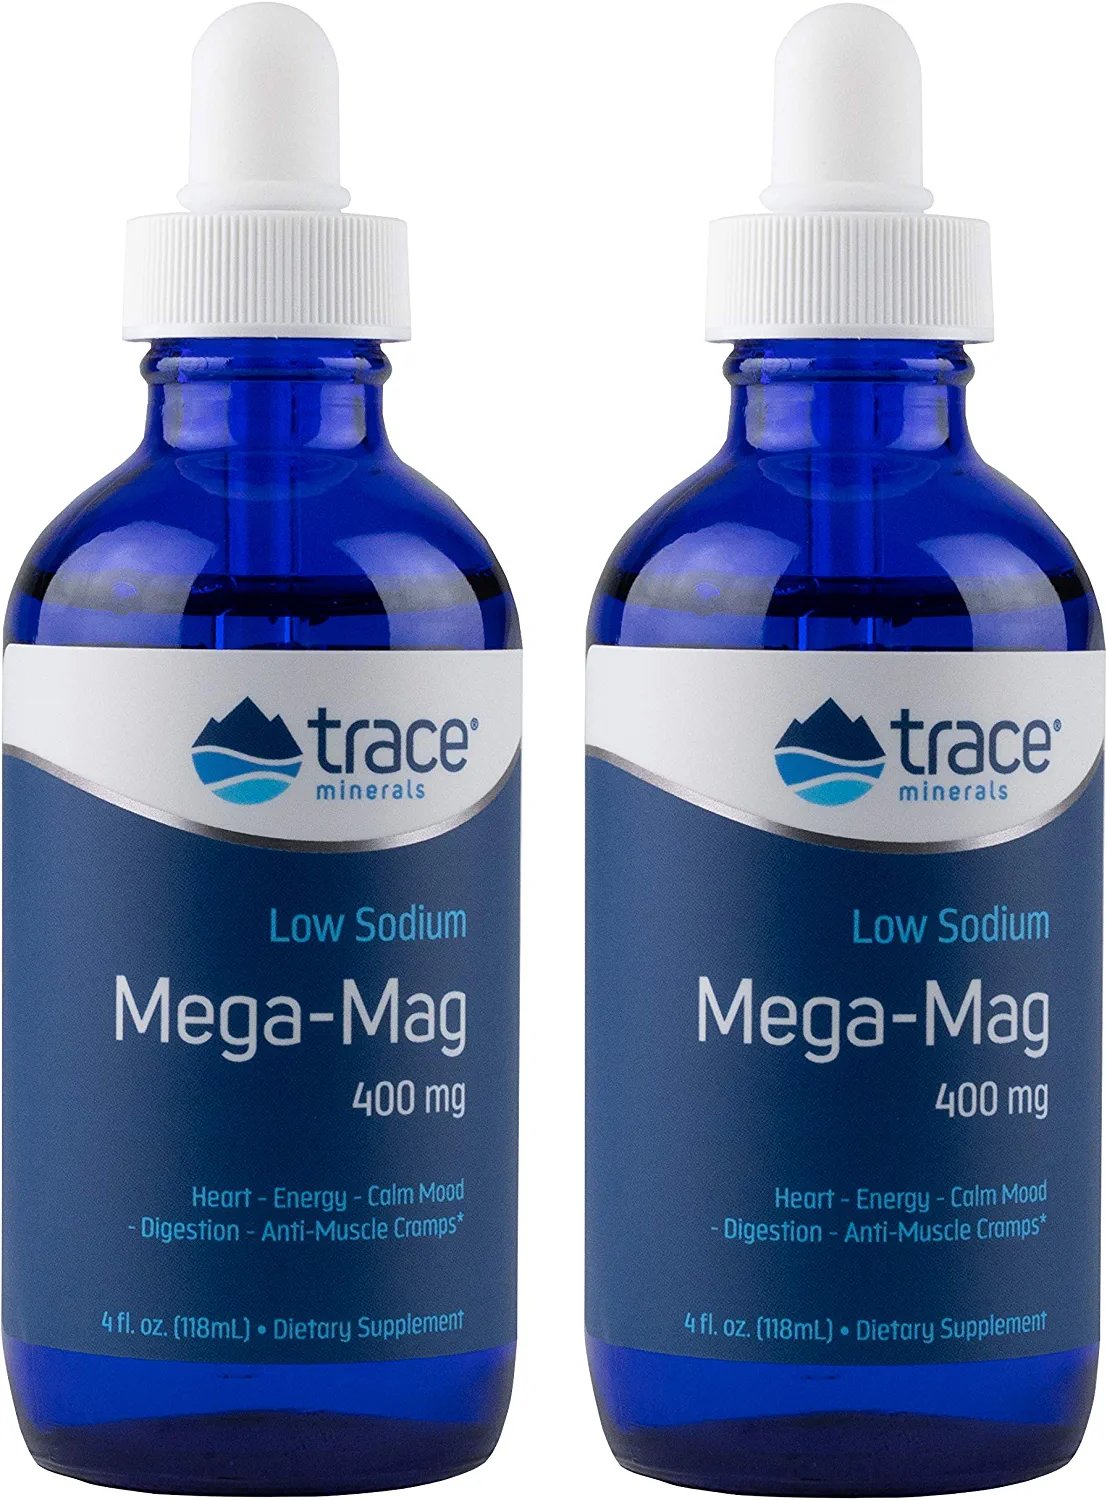 Trace Minerals | Mega-Mag 400 mg Liquid Magnesium Chloride | Supports Normal Blood Pressure, Heart Health, Calm Mood, Digestion, Sleep | Helps with Muscle Cramps, Spasms, Chronic Headaches | 60 Servings, 4 fl oz (2 Pack)